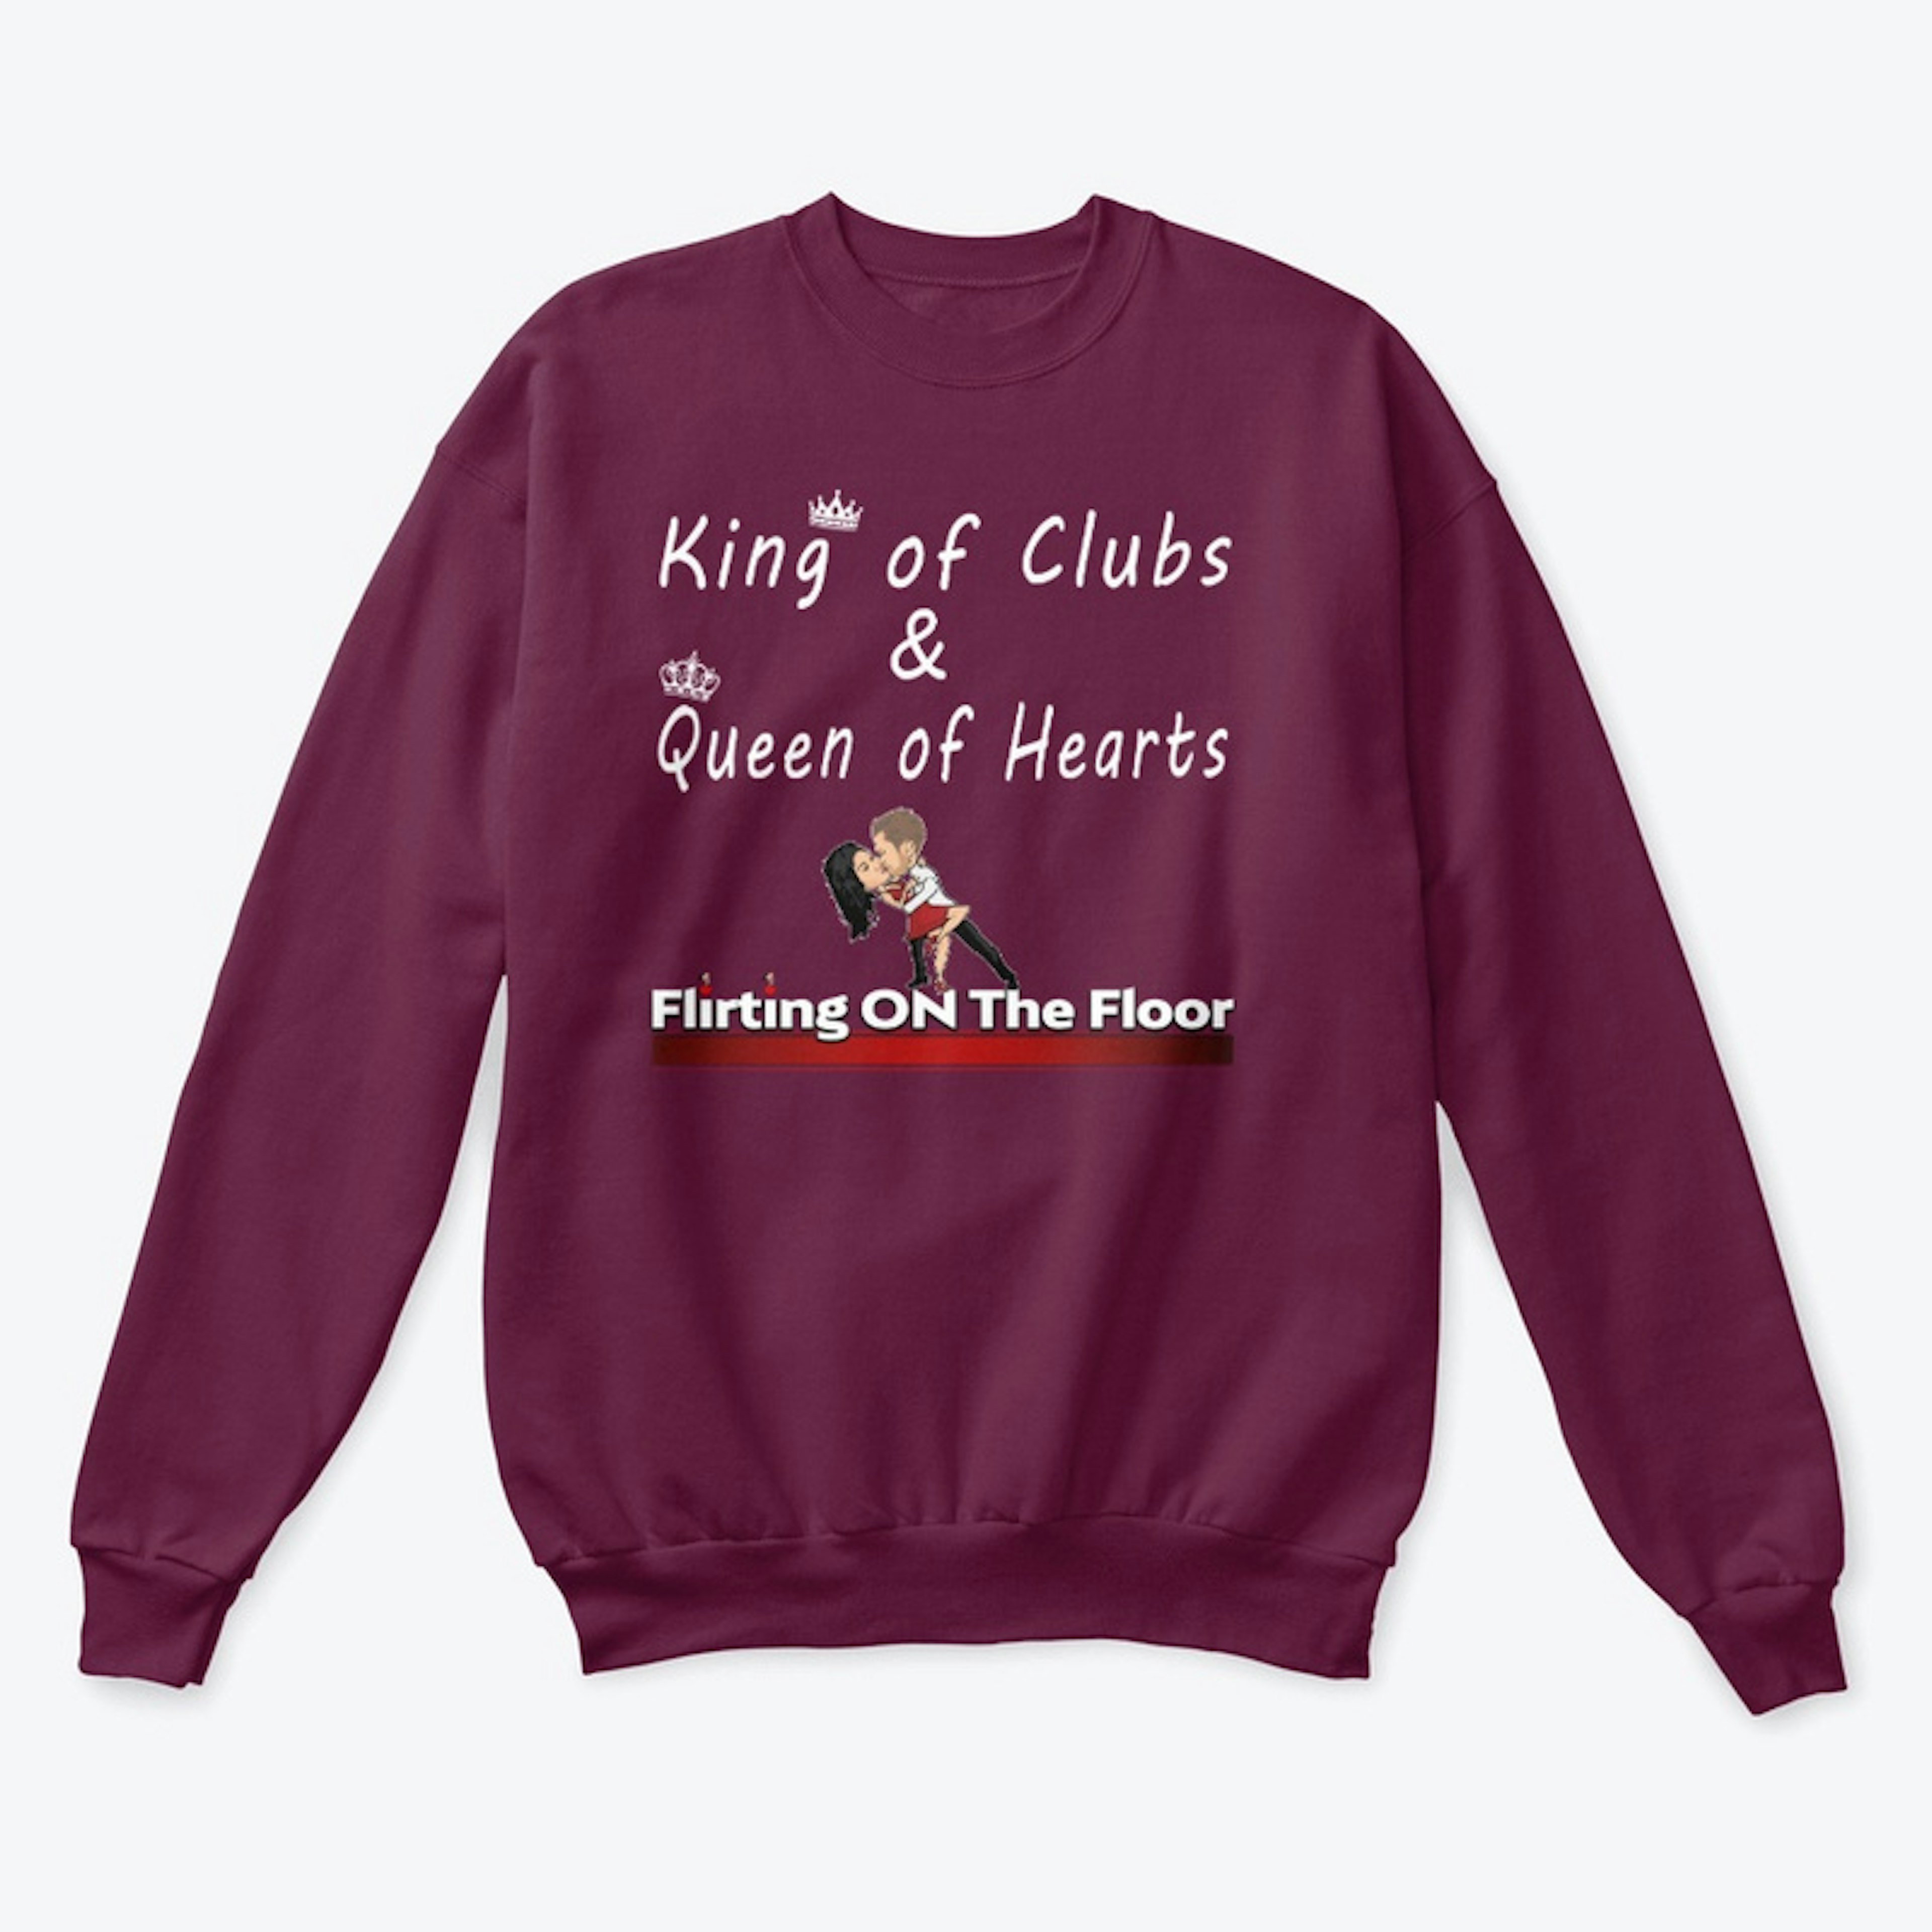 King of clubs and queen of hearts